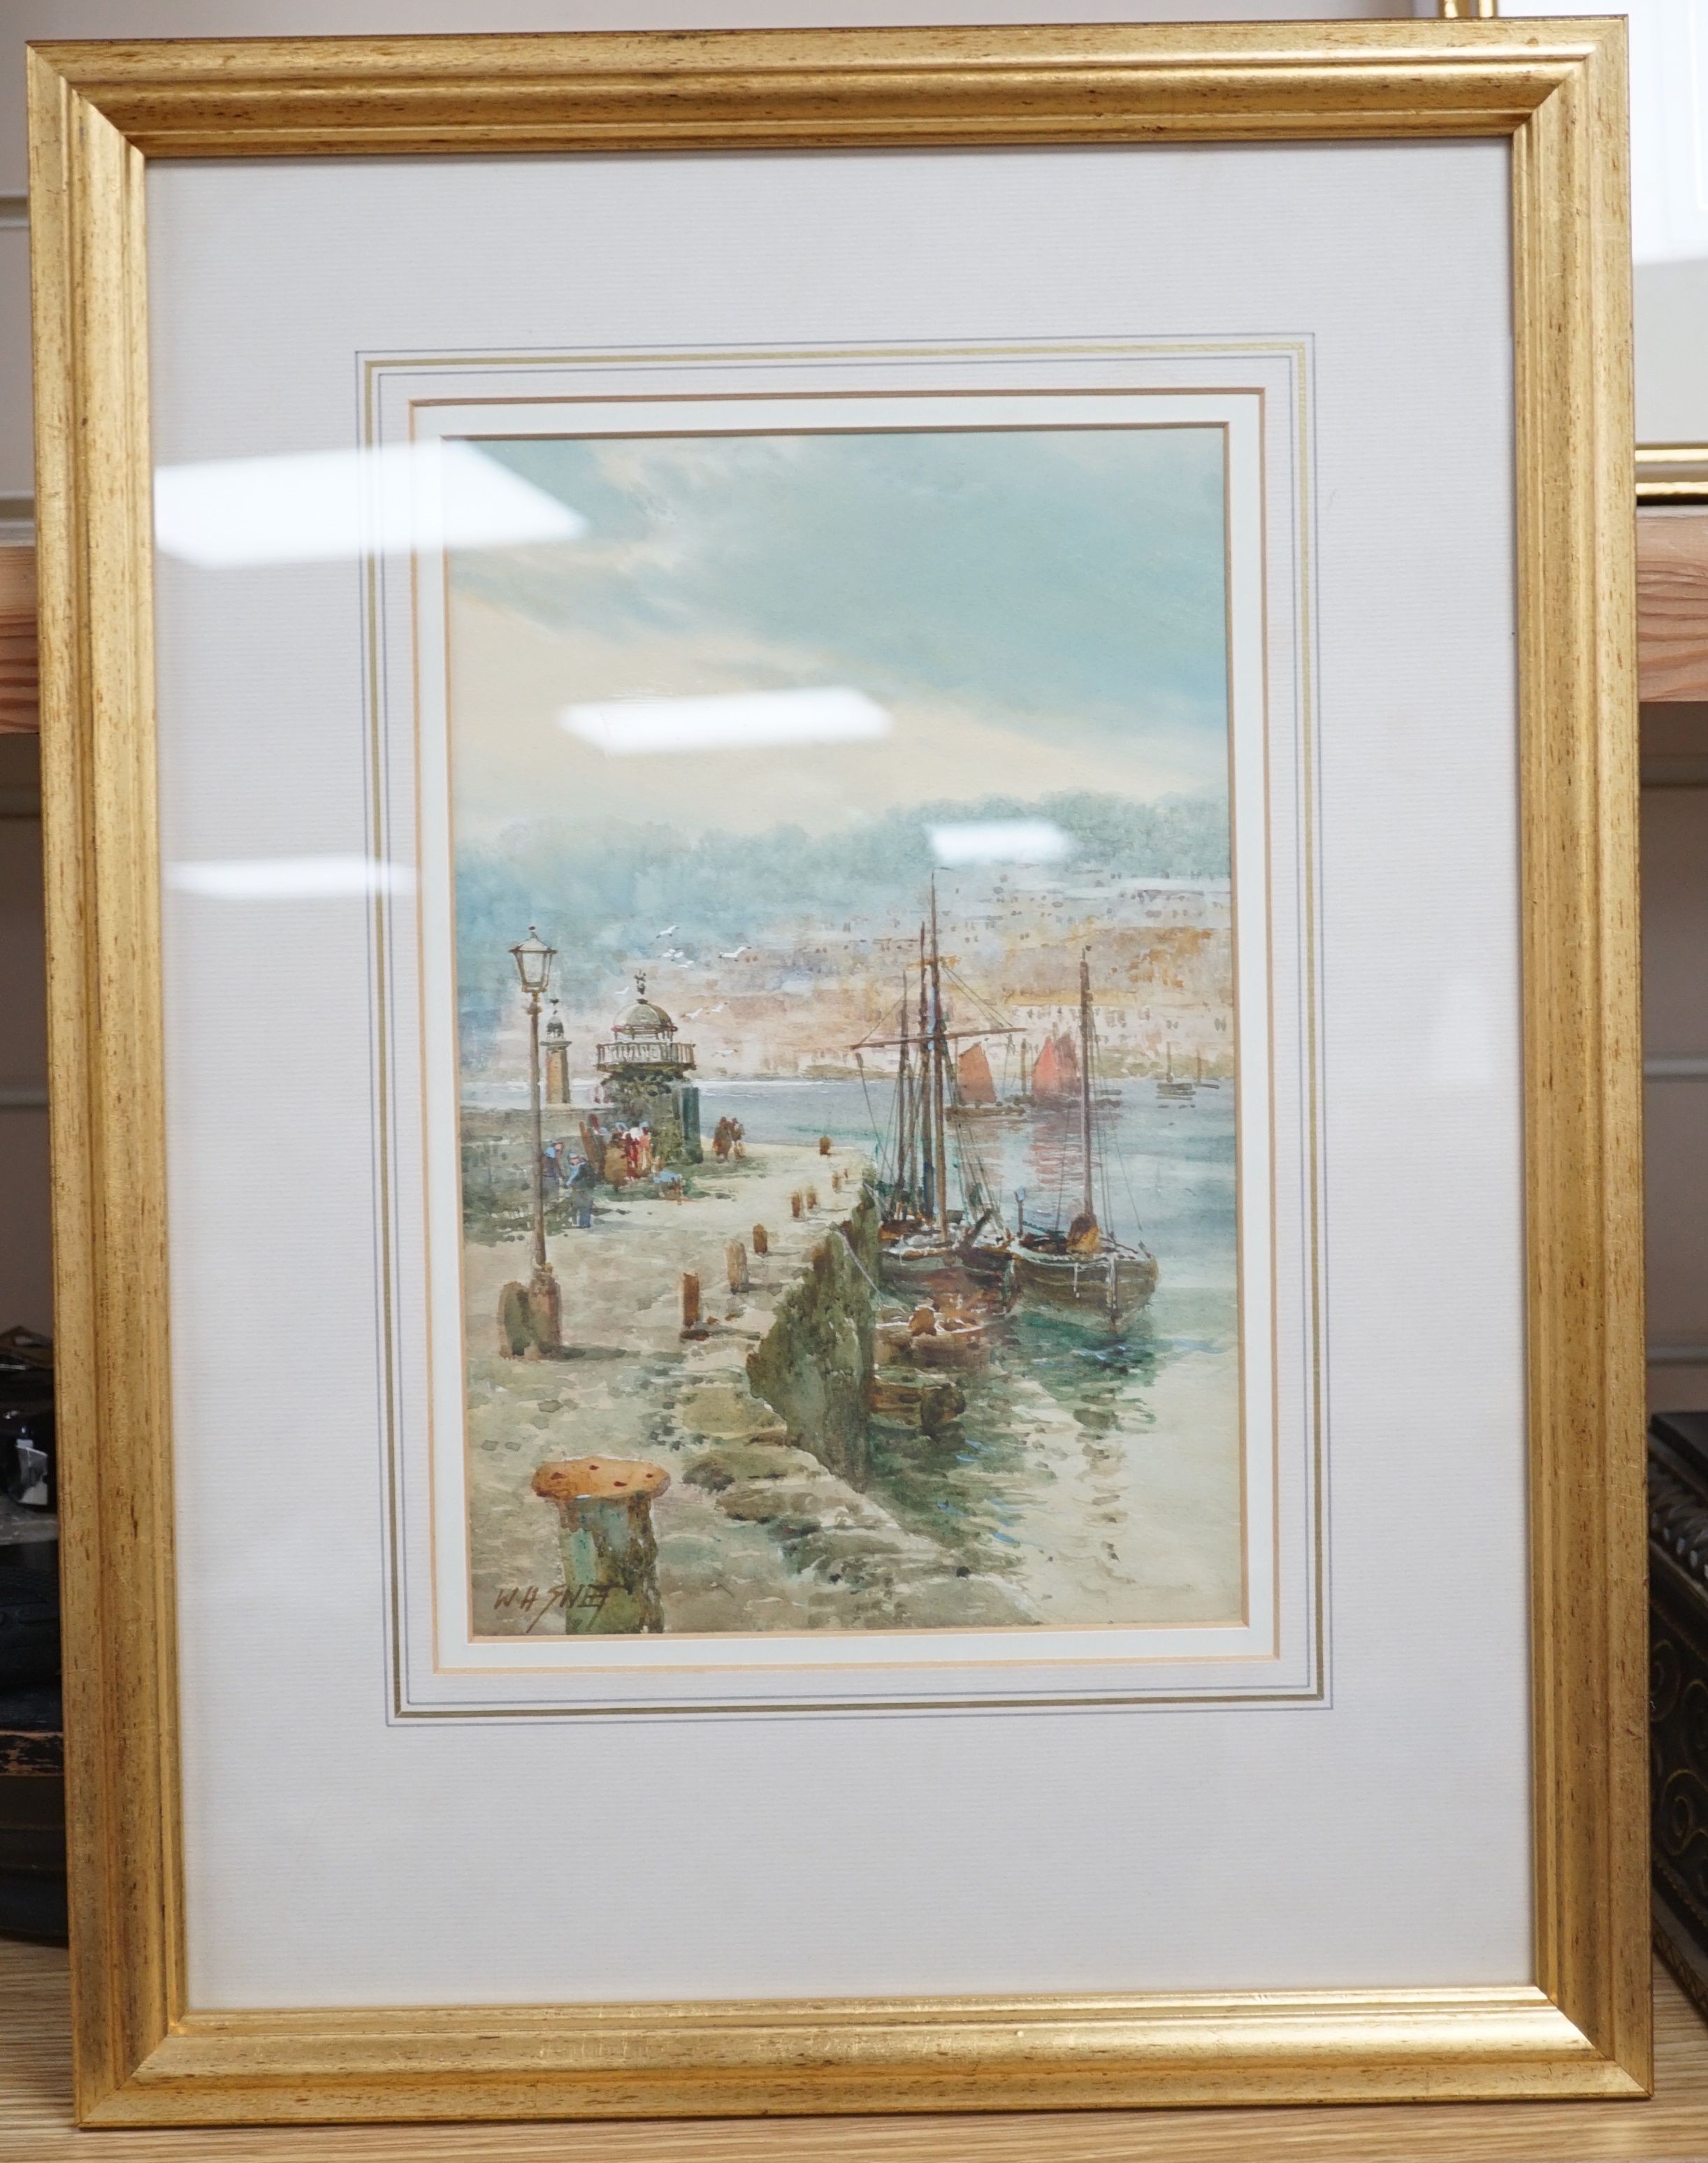 Walter H. Sweet (1890-1943), Fishing boats at Newlyn, watercolour, signed, 27 x 18cm